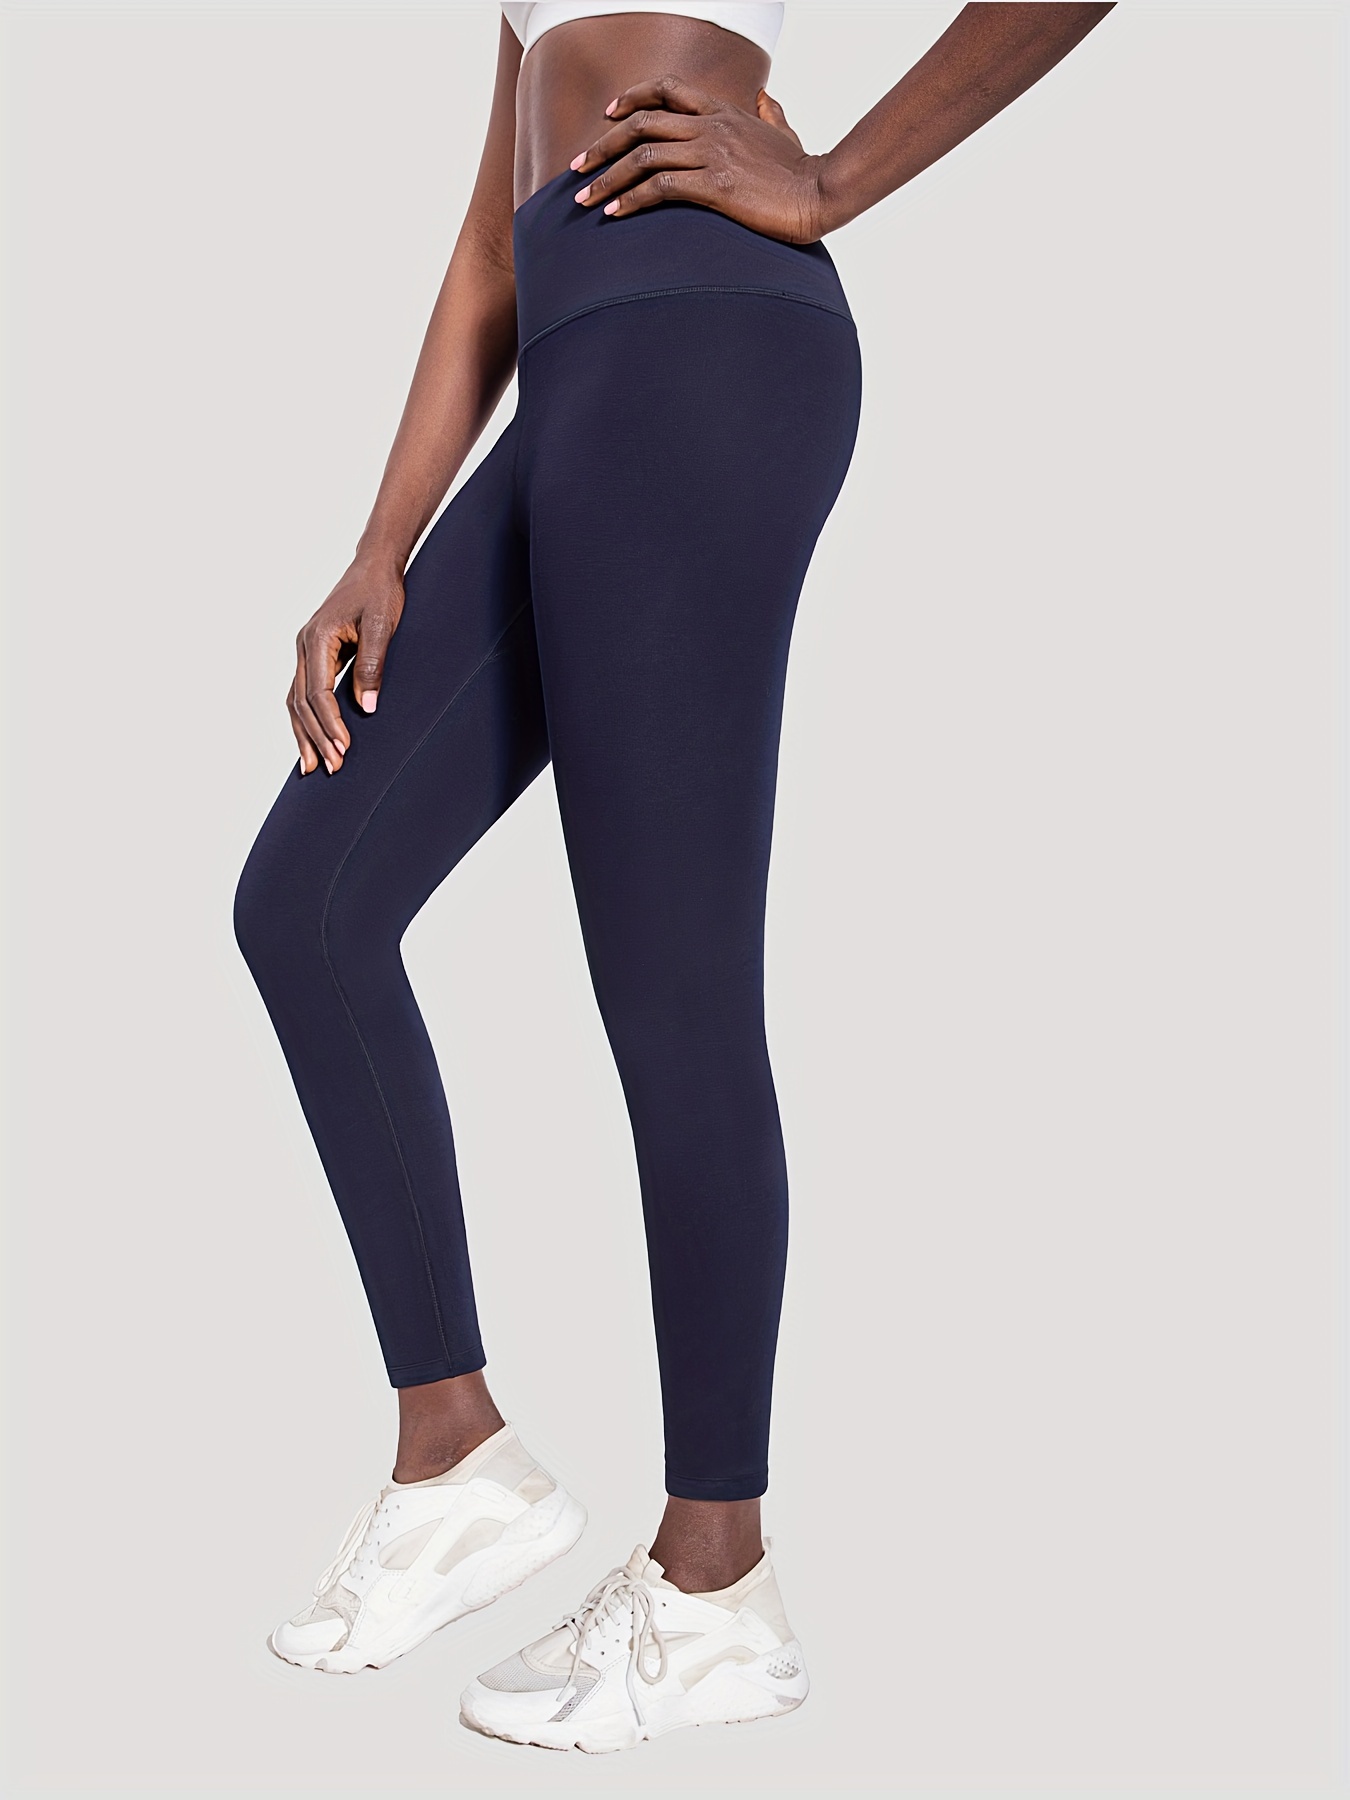 High-Waisted Yoga Leggings with Phone Pocket and Sweat Absorption for  Women's Fitness and Activewear